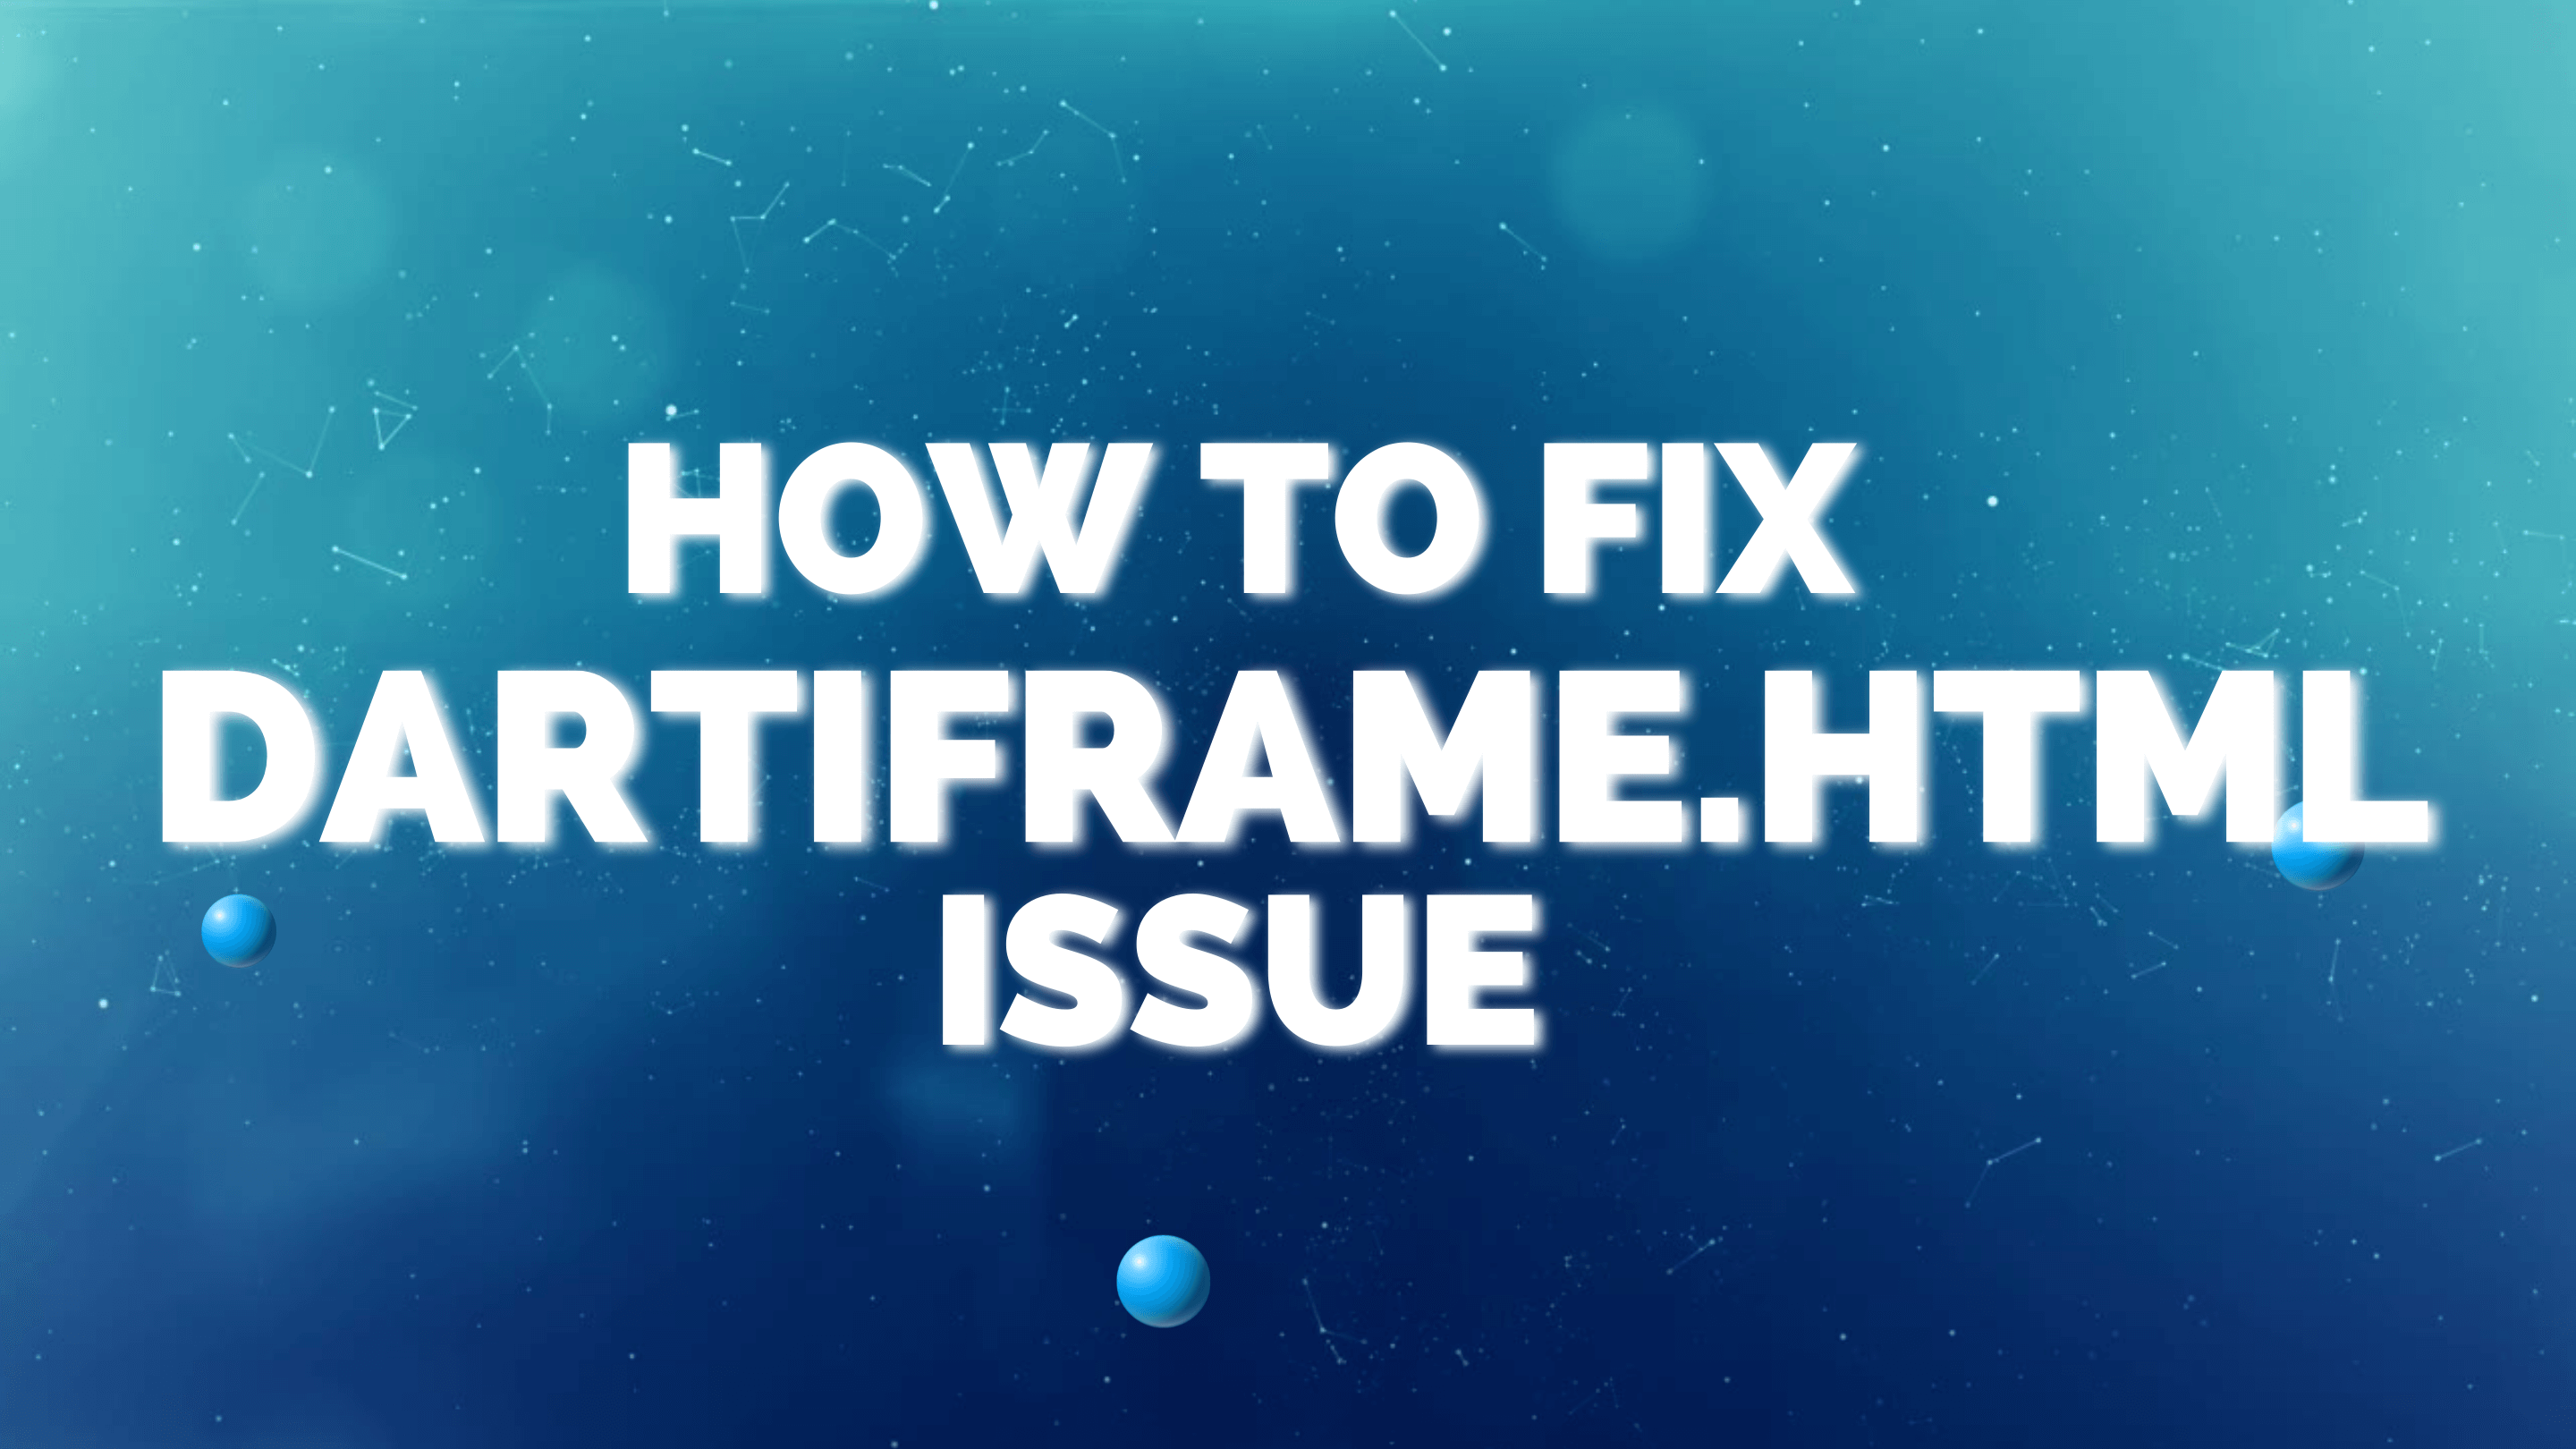 DARTIframe.html what it is and How to fix it